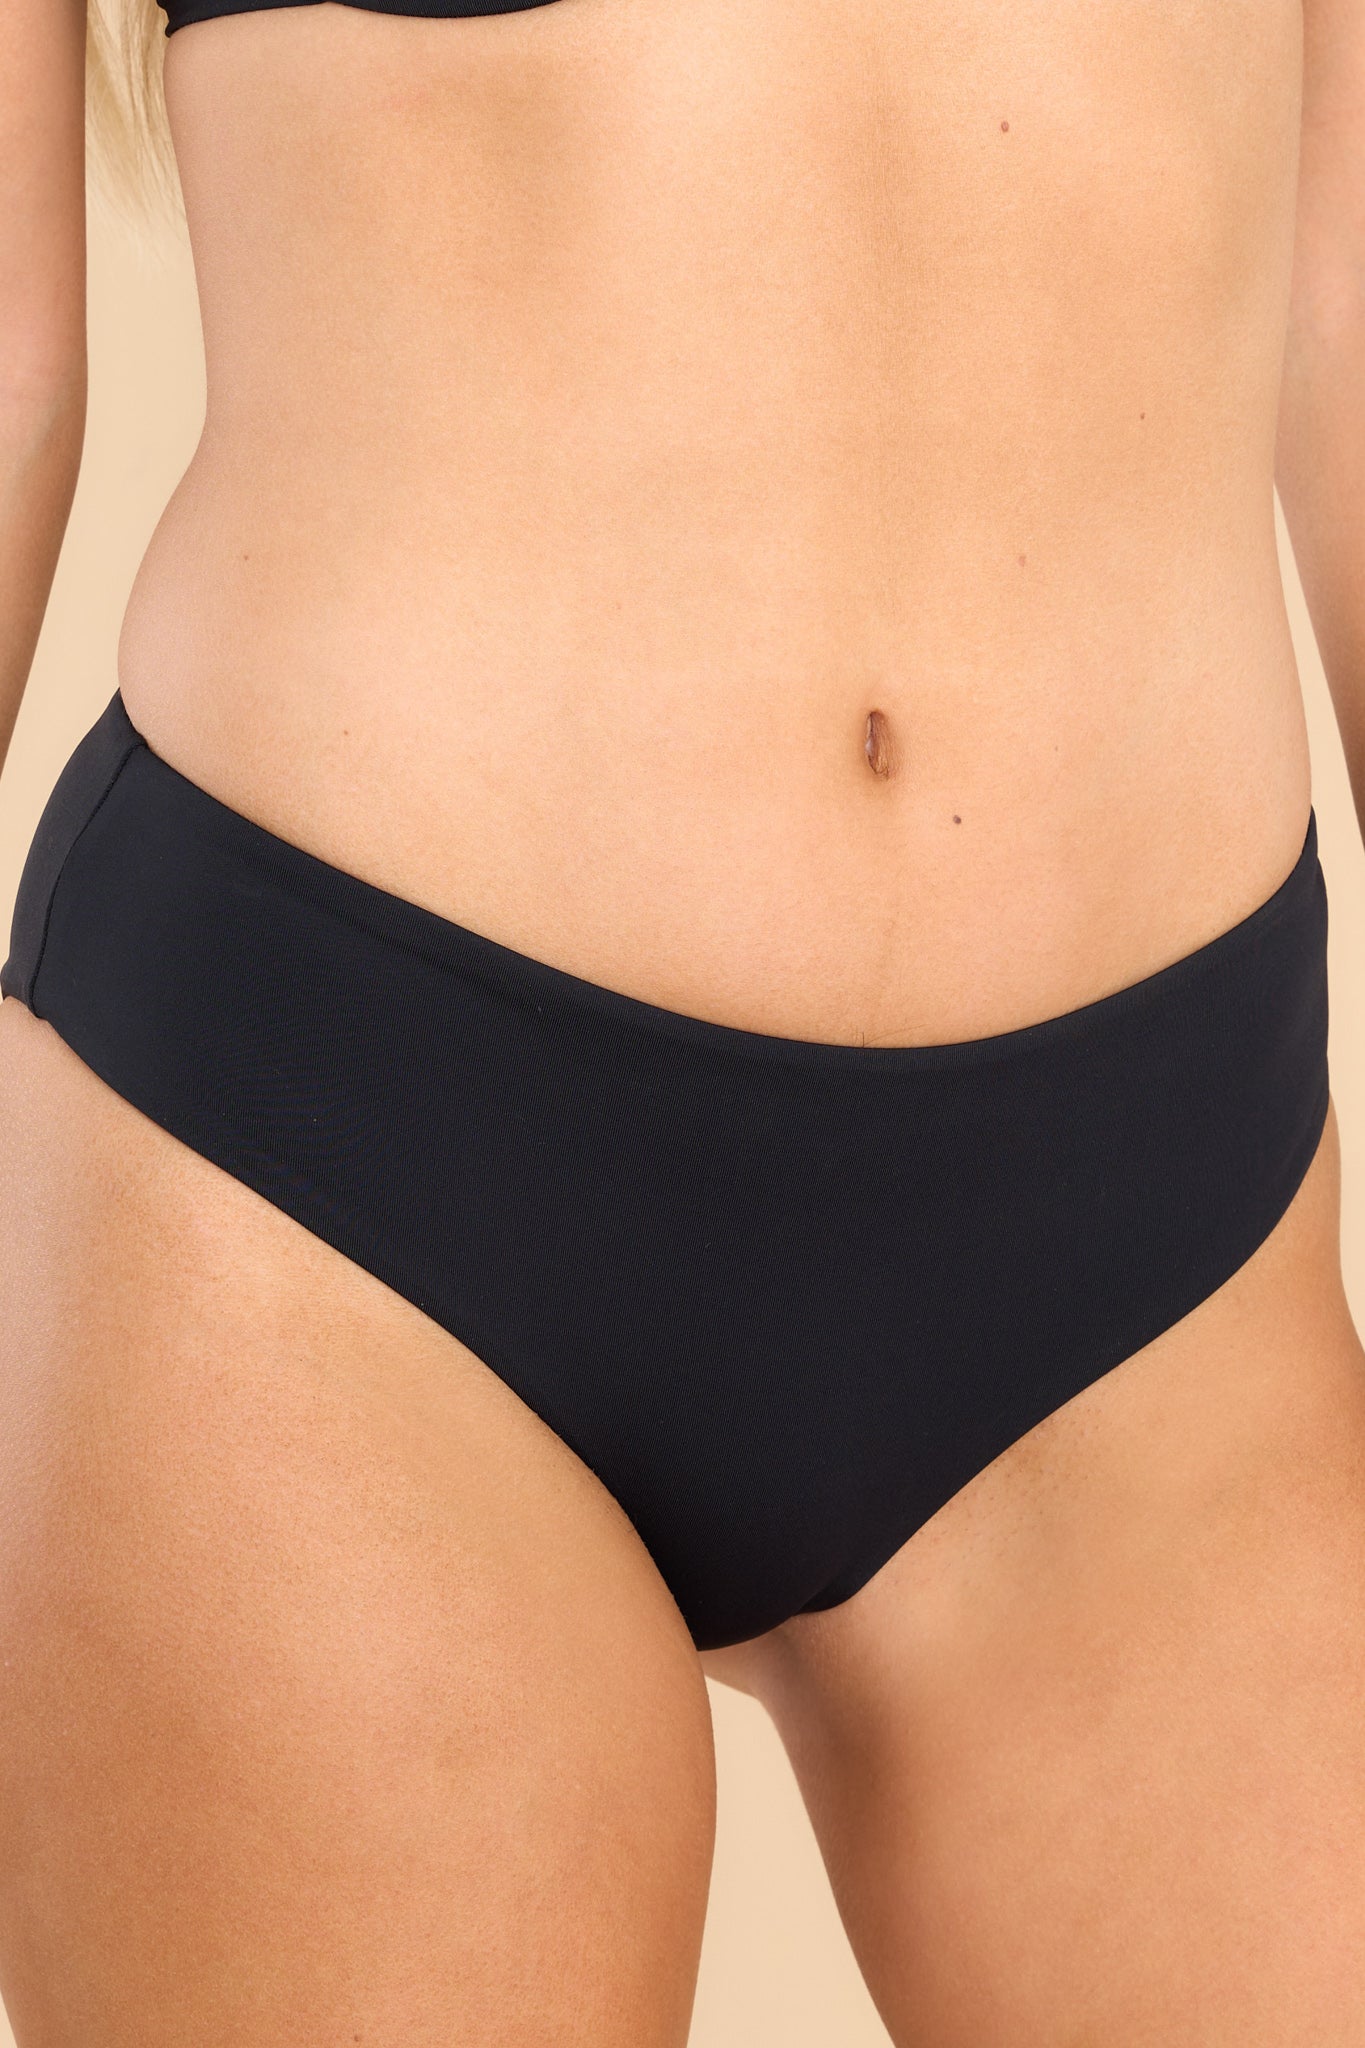 These all black bottoms feature a low-rise and a stretchy material.